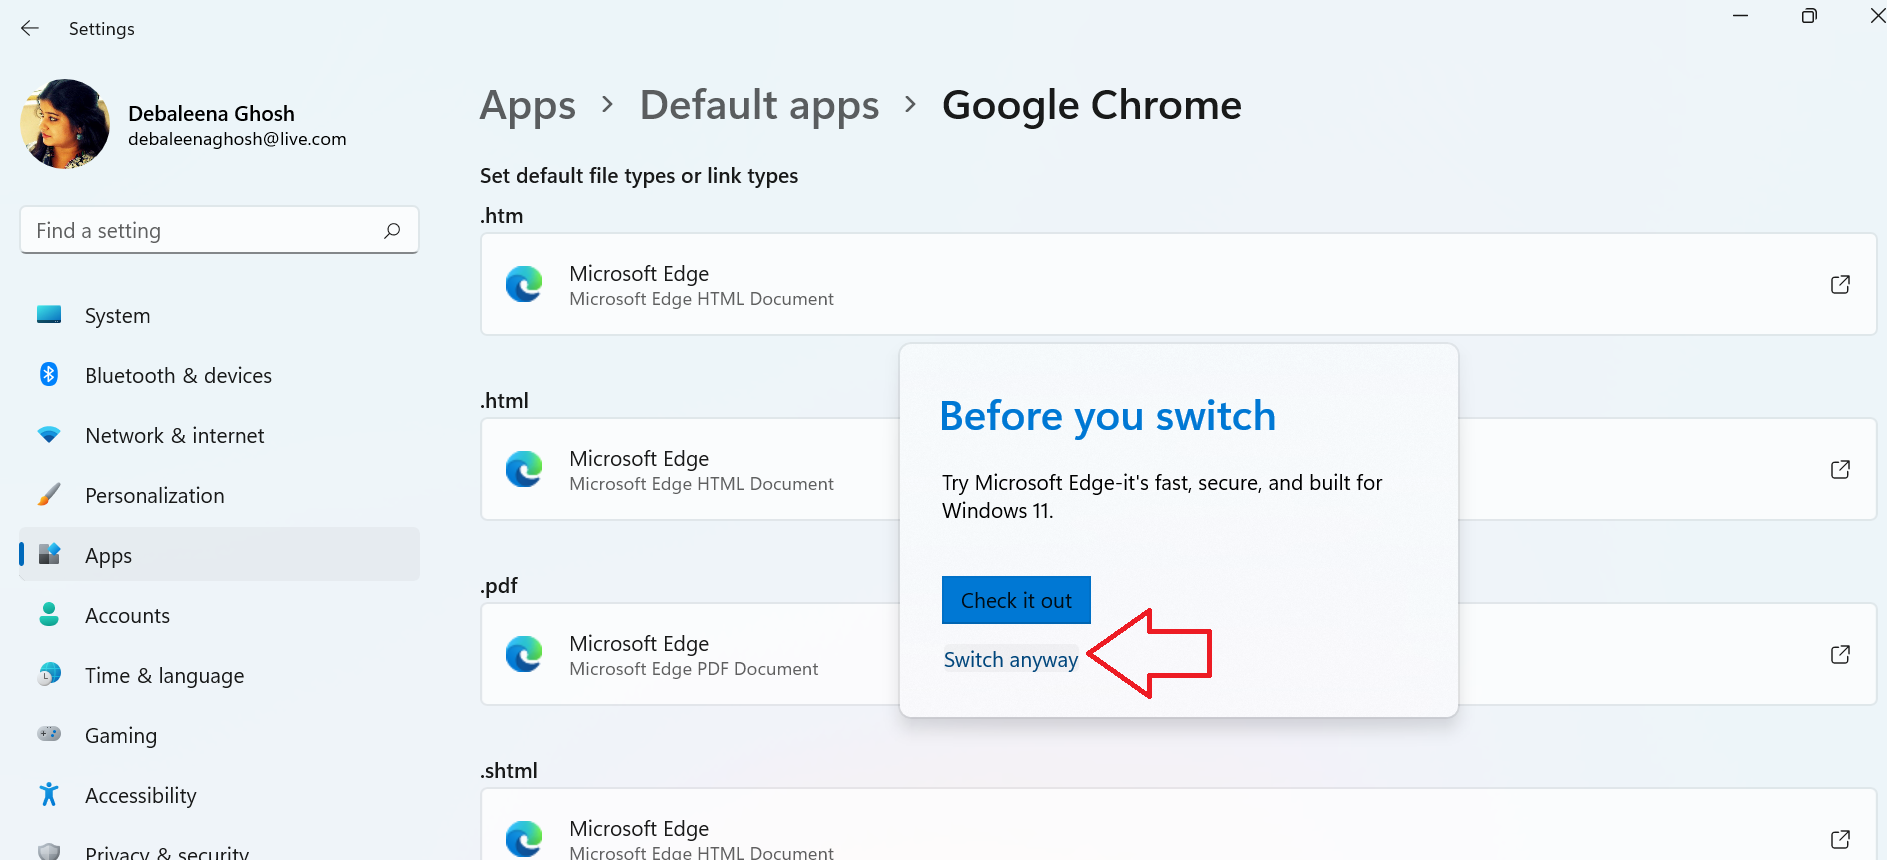 How To Change Your Default Browser In Windows 11?